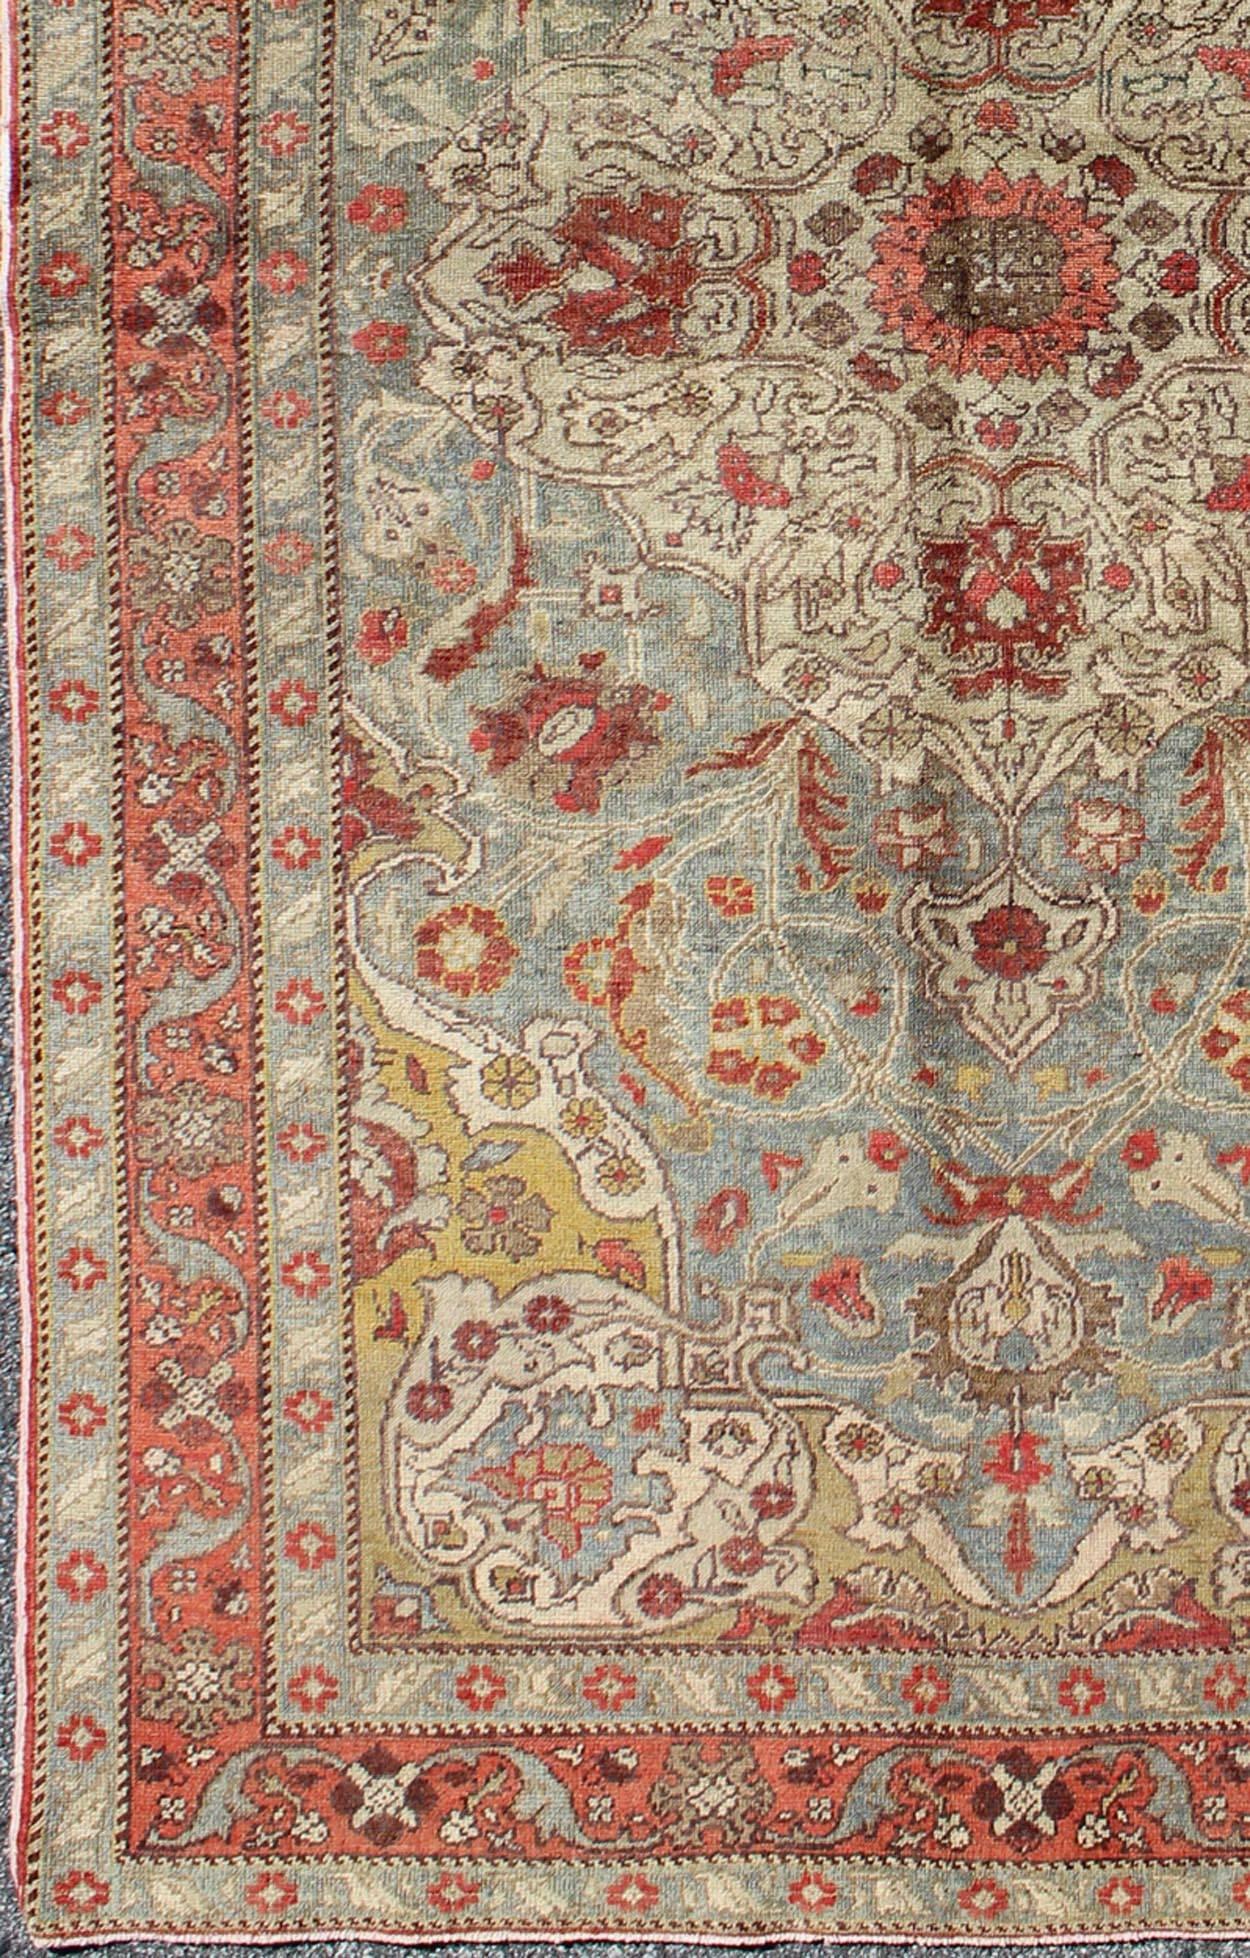 Floral medallion antique Turkey Sivas rug in light blue, red, ivory, chartreuse, rug tu-trs-95198, country of origin / type: Turkey / Oushak, circa 1930.

This antique Turkish Sivas rug features an intricately beautiful design with a floral